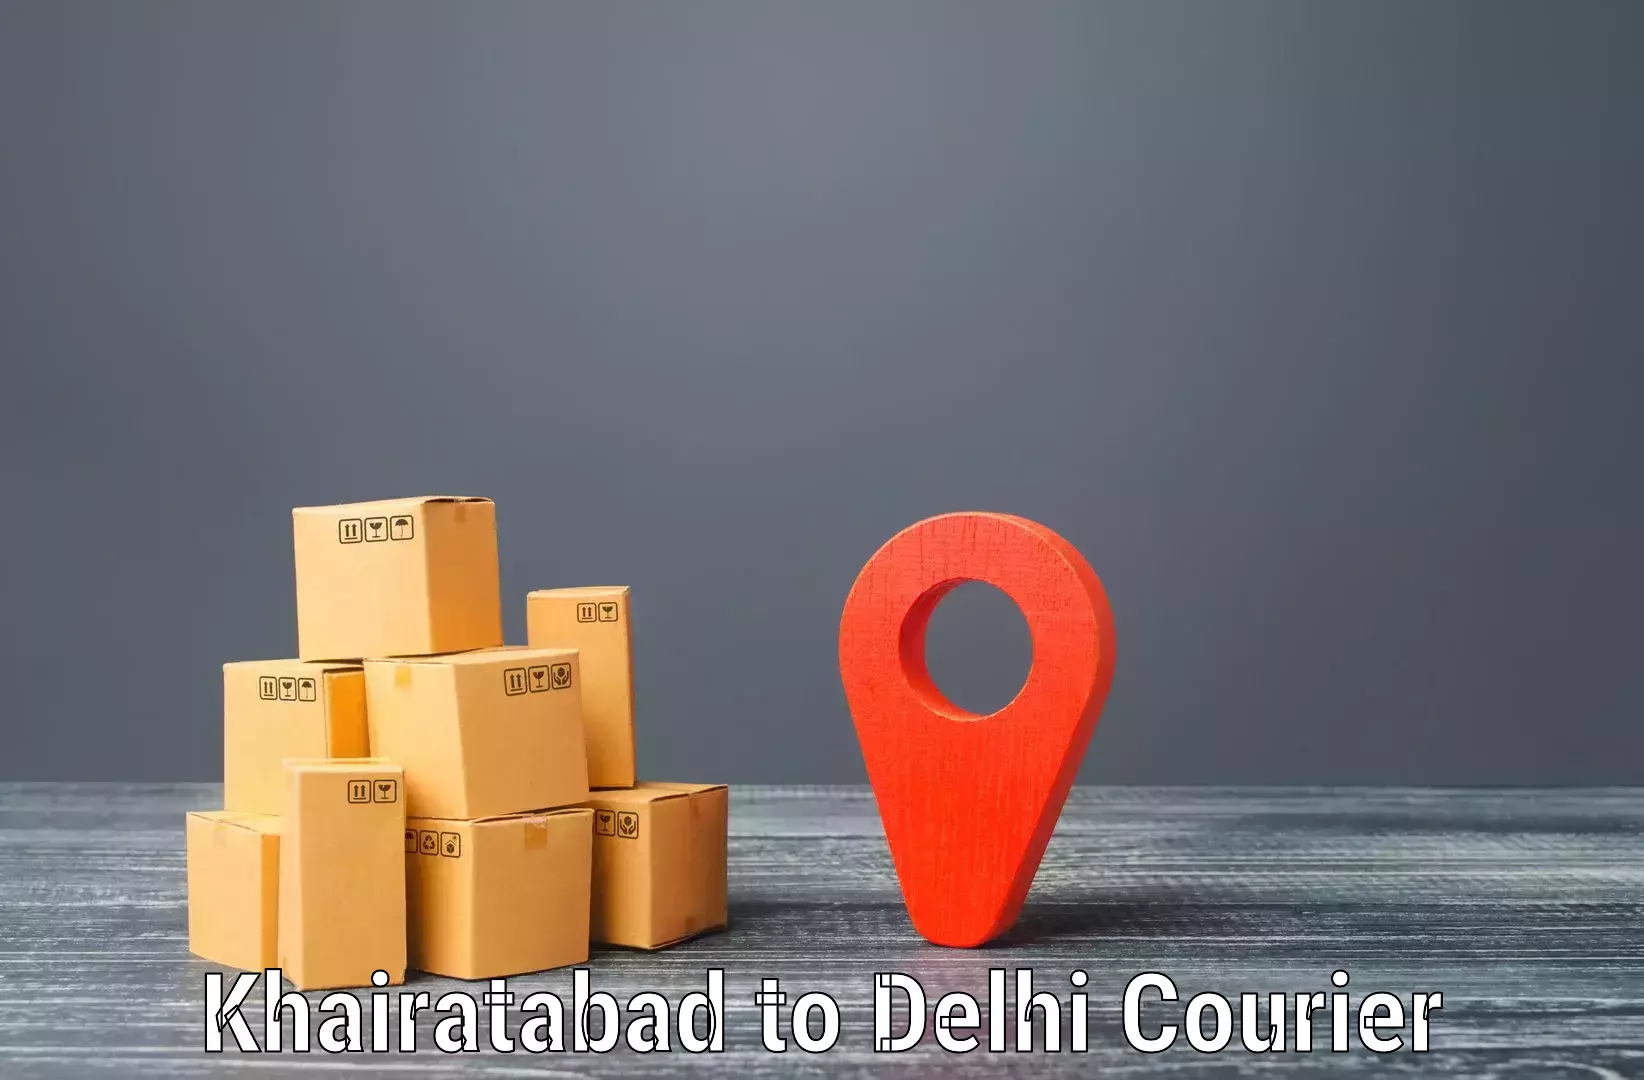 Advanced shipping services Khairatabad to Indraprastha